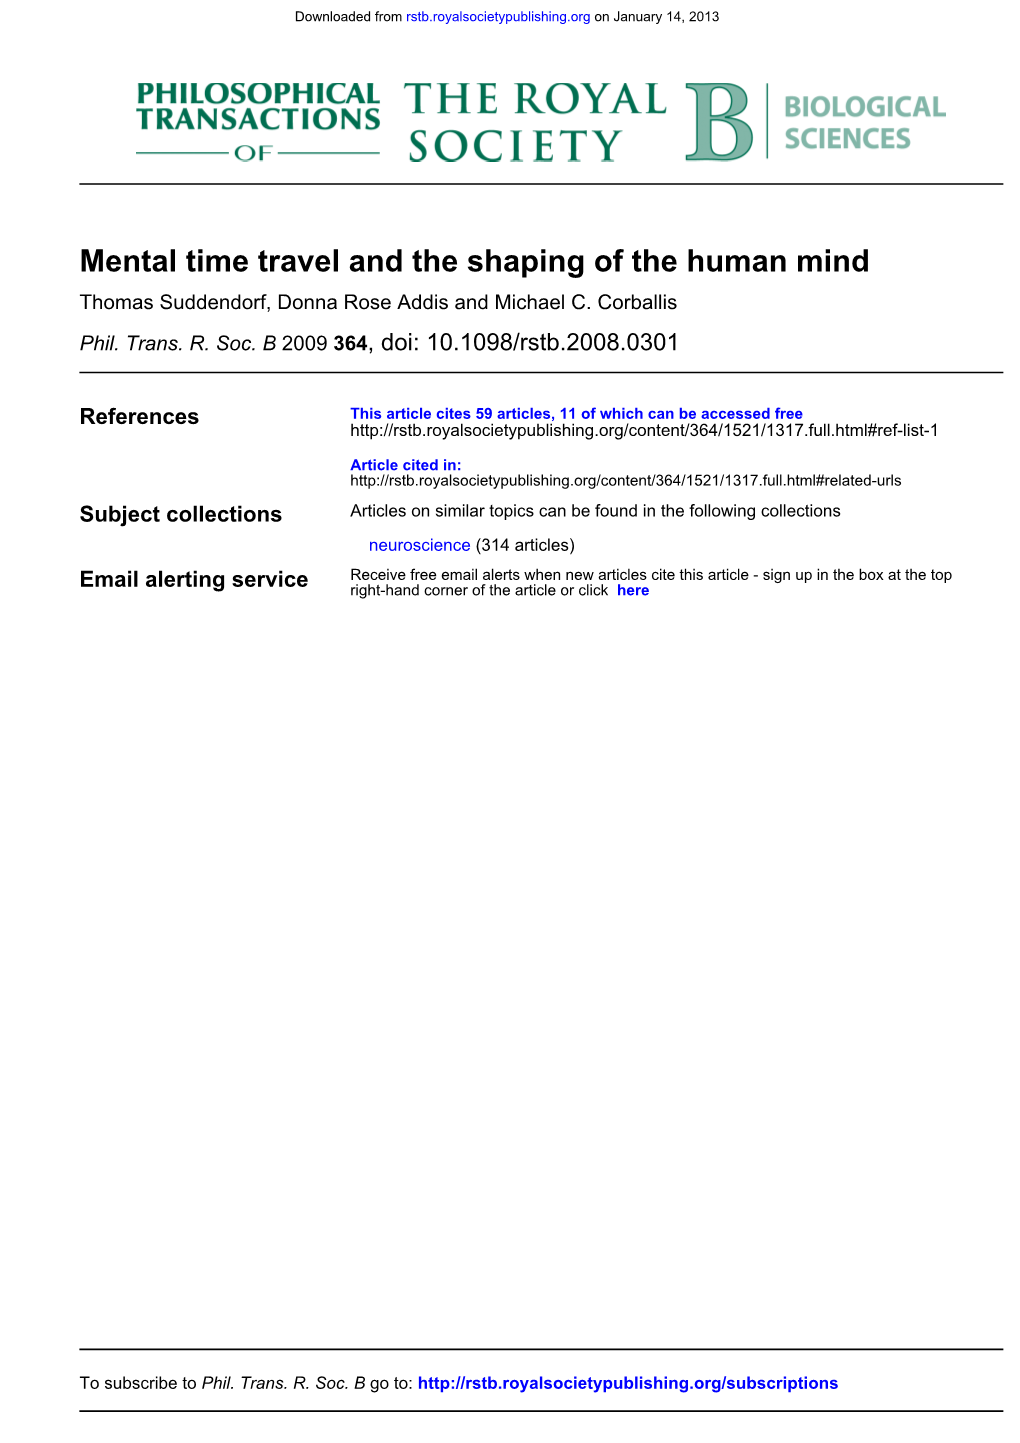 Mental Time Travel and the Shaping of the Human Mind